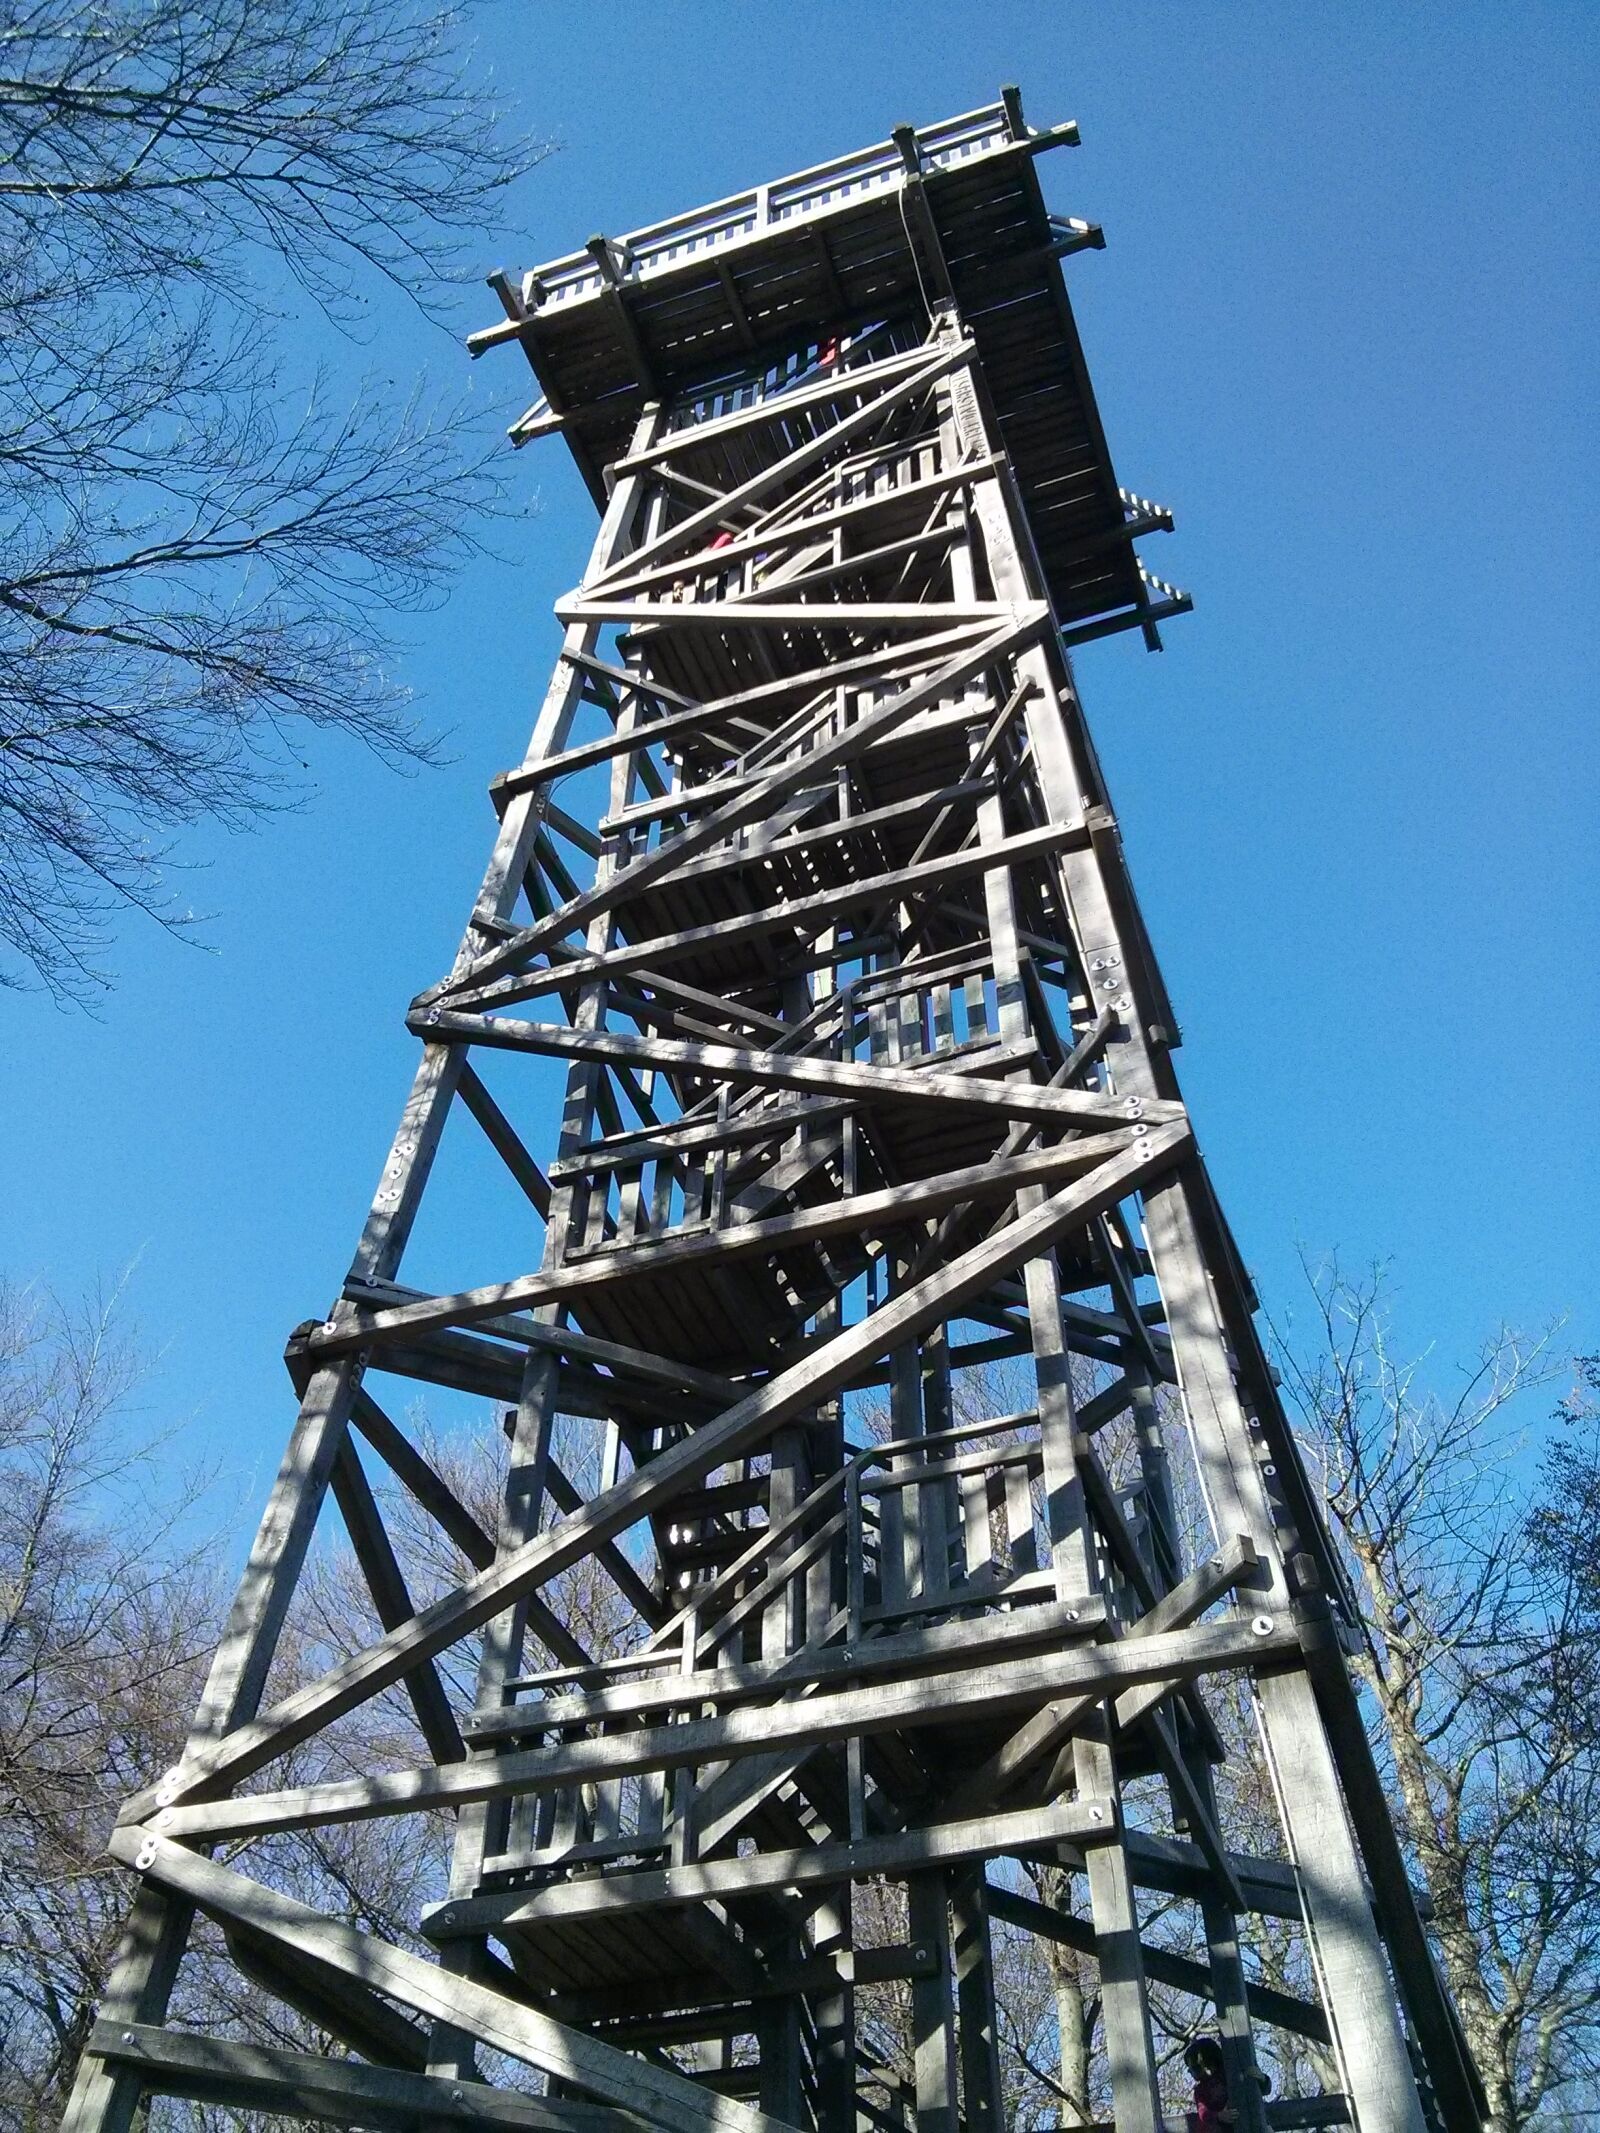 LG Nexus 4 sample photo. Tower, wooden, building photography